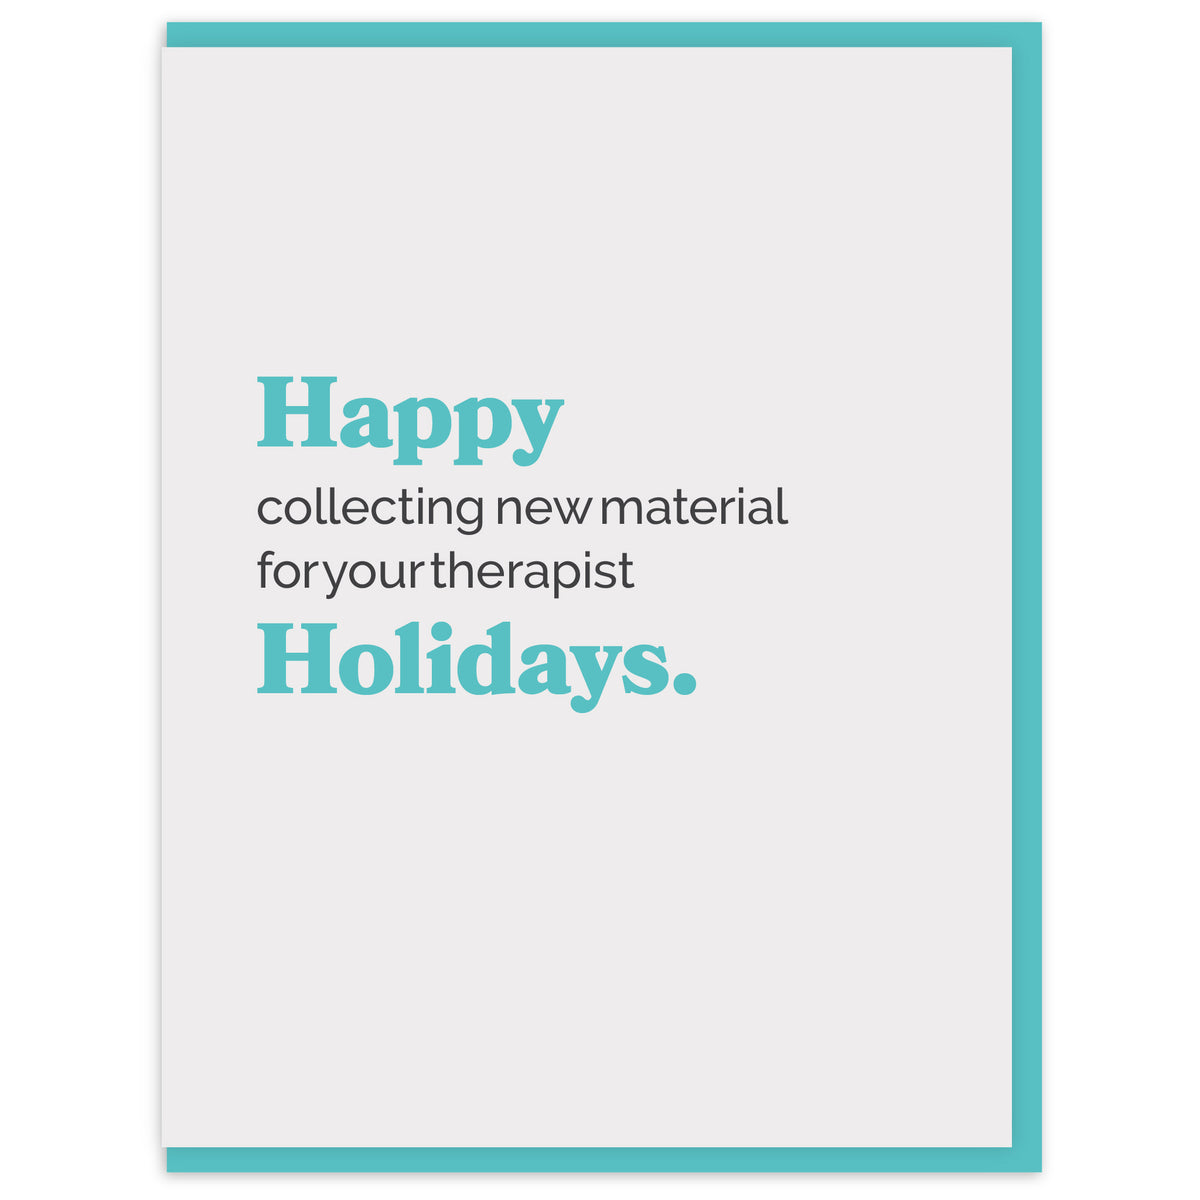 Happy collecting new material for your therapist Holidays.